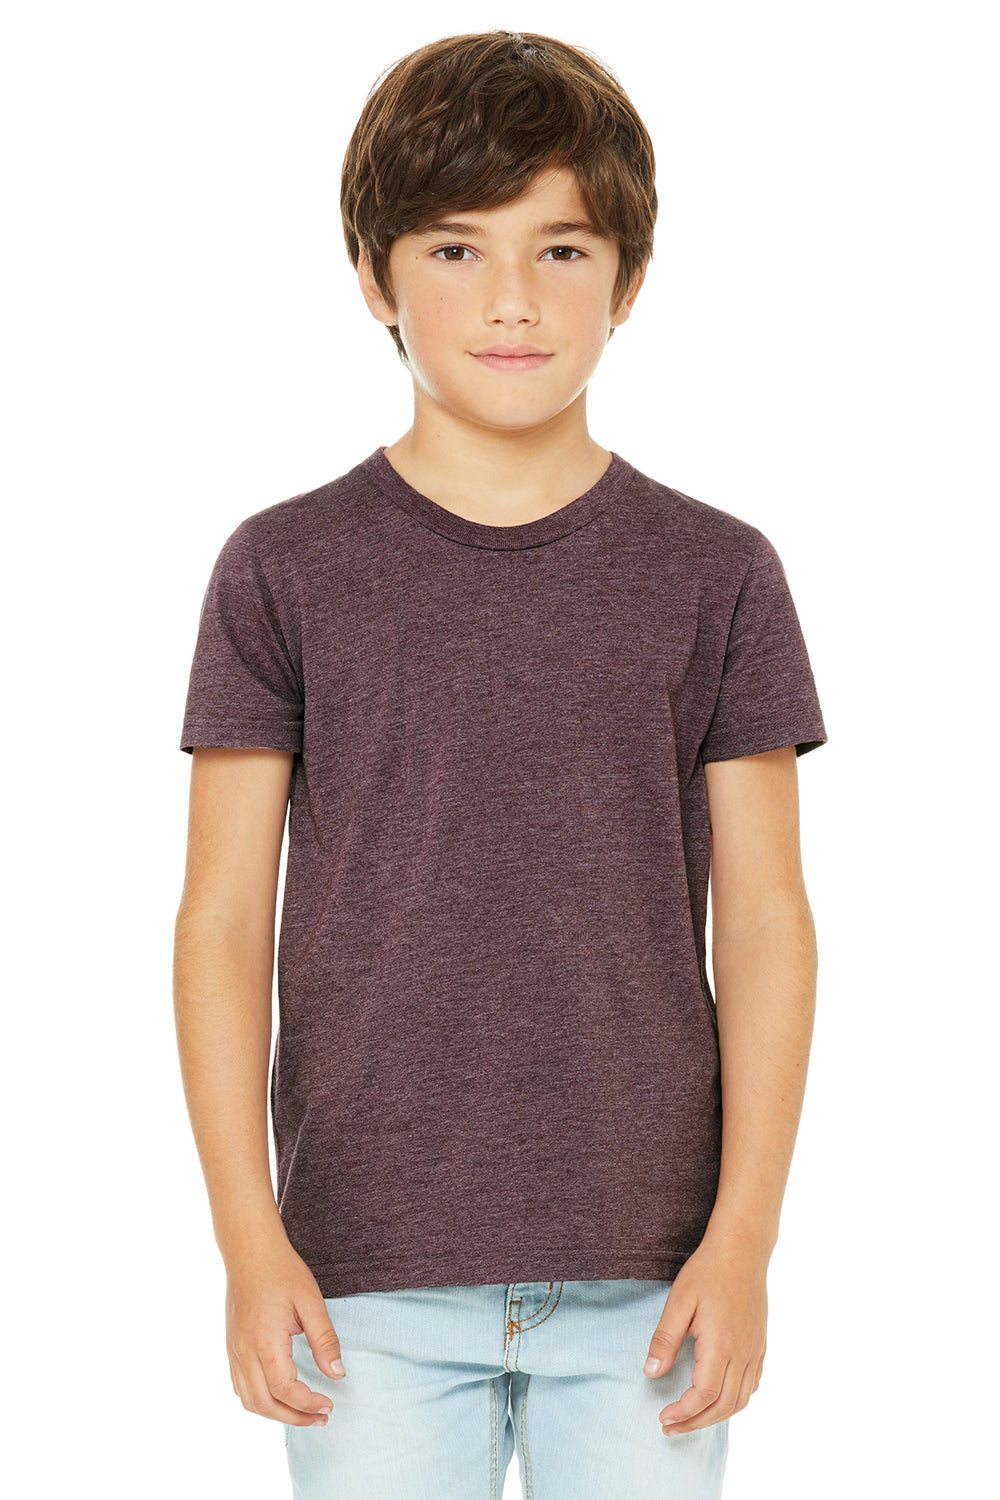 Bella + Canvas 3001Y Youth Jersey Short Sleeve Crewneck T-Shirt Heather Maroon Model Front